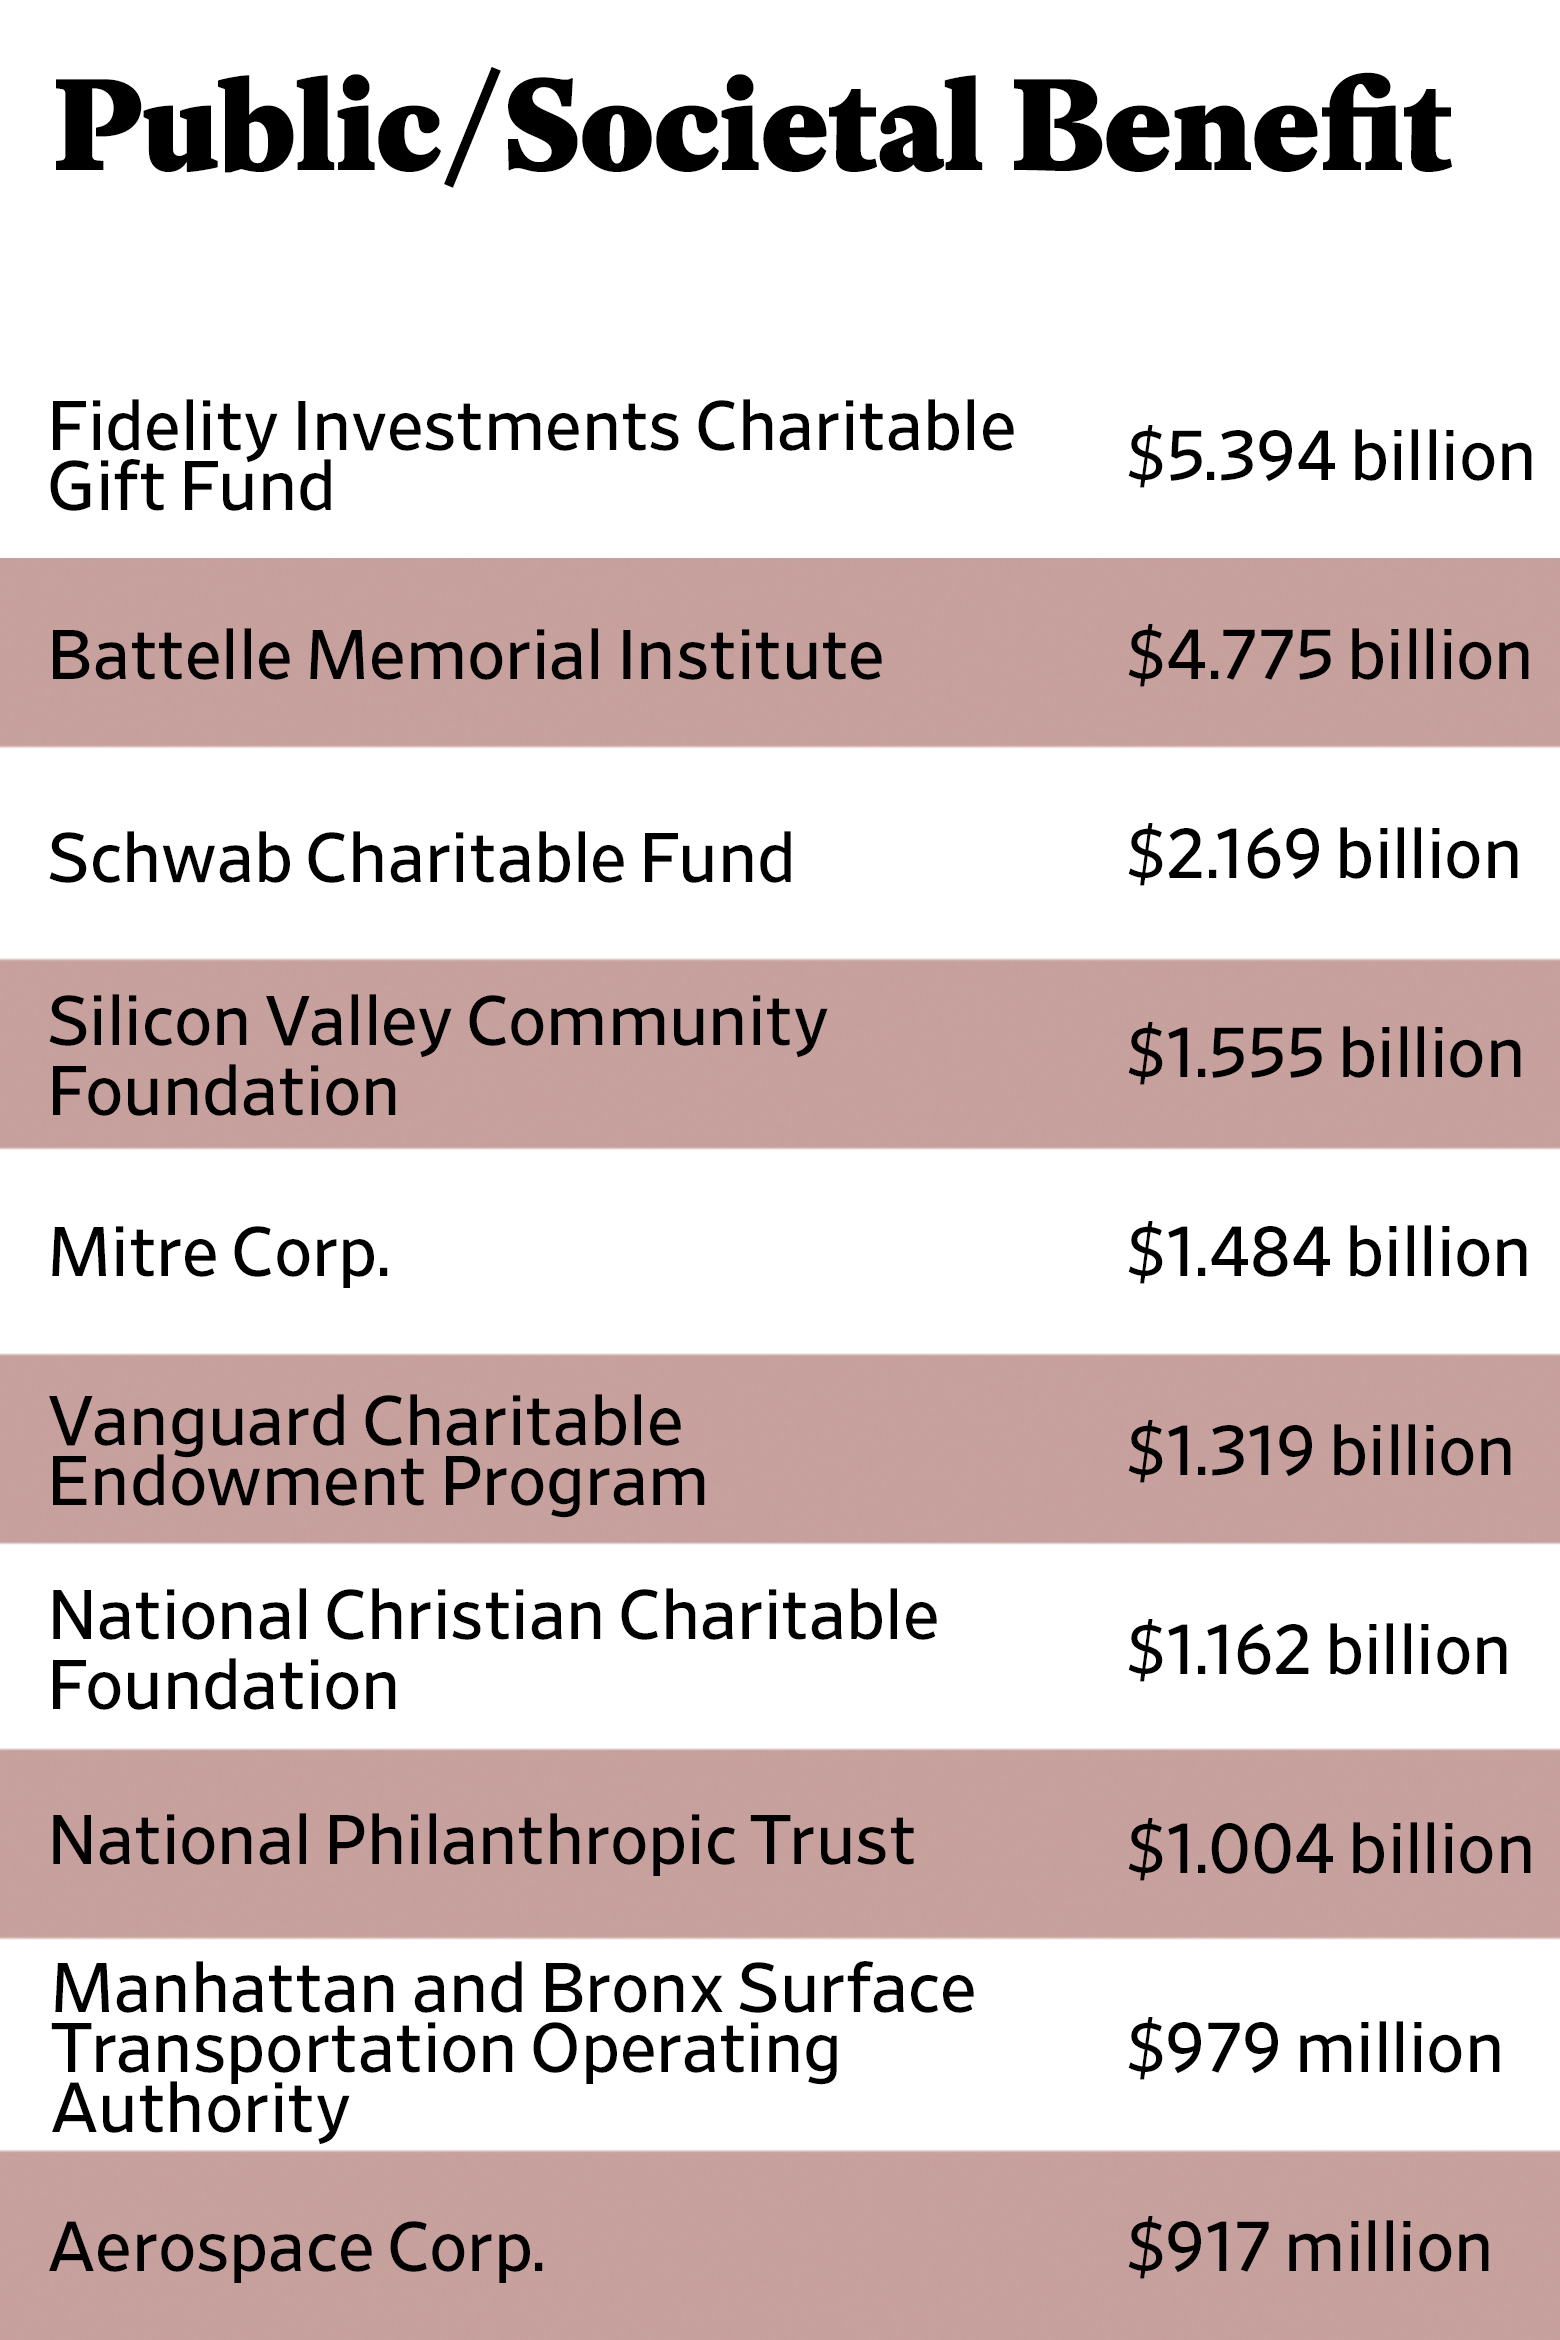 The Slate 90 fiscal 2015 rankings of the top 10 organizations classified as public/societal benefit.